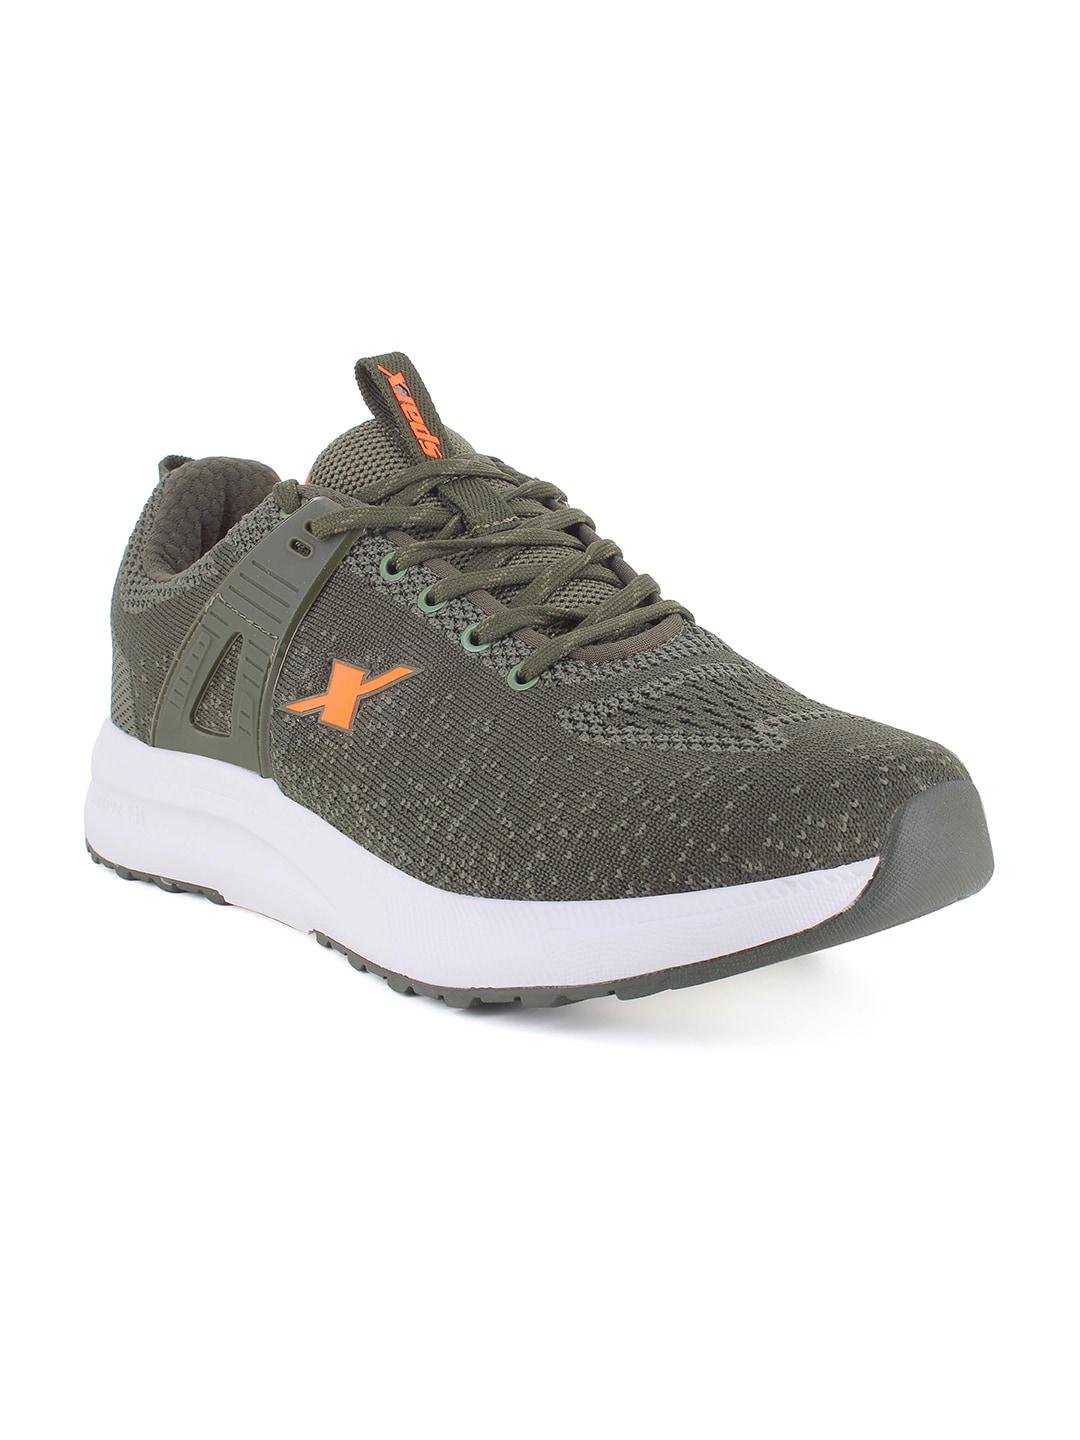 Sparx Men Lace-Up Mesh Running Non-Marking Shoes